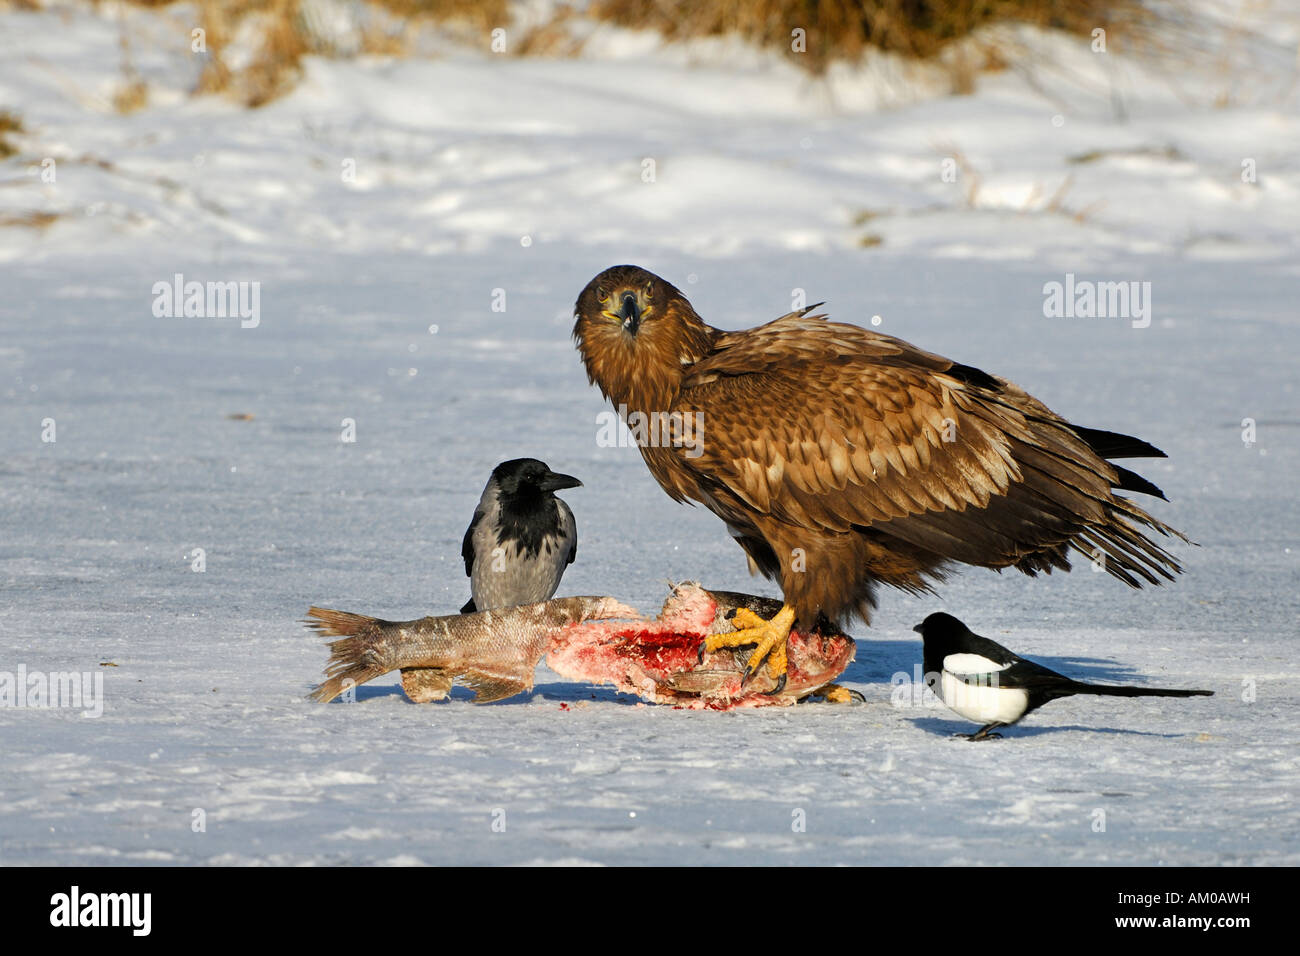 White Tailed Eagle, European Magpie, Hooded Crow at the bait Stock Photo